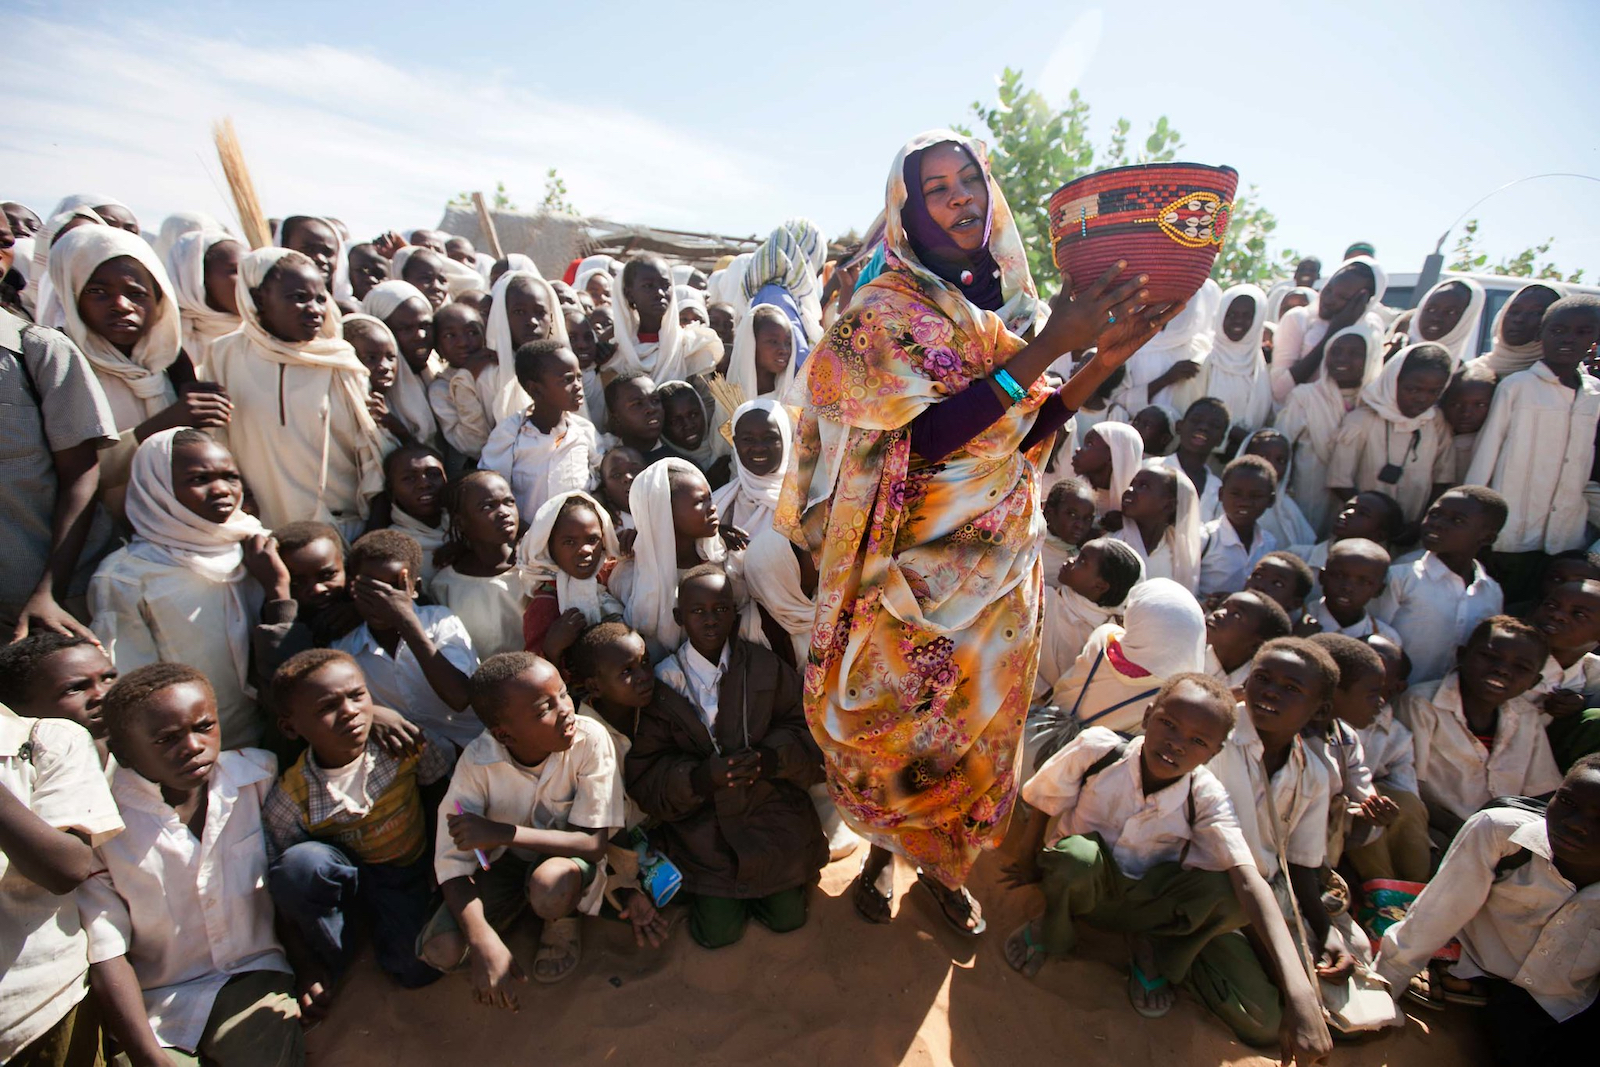 A woman in a camp for internally displaced persons in North Darfur